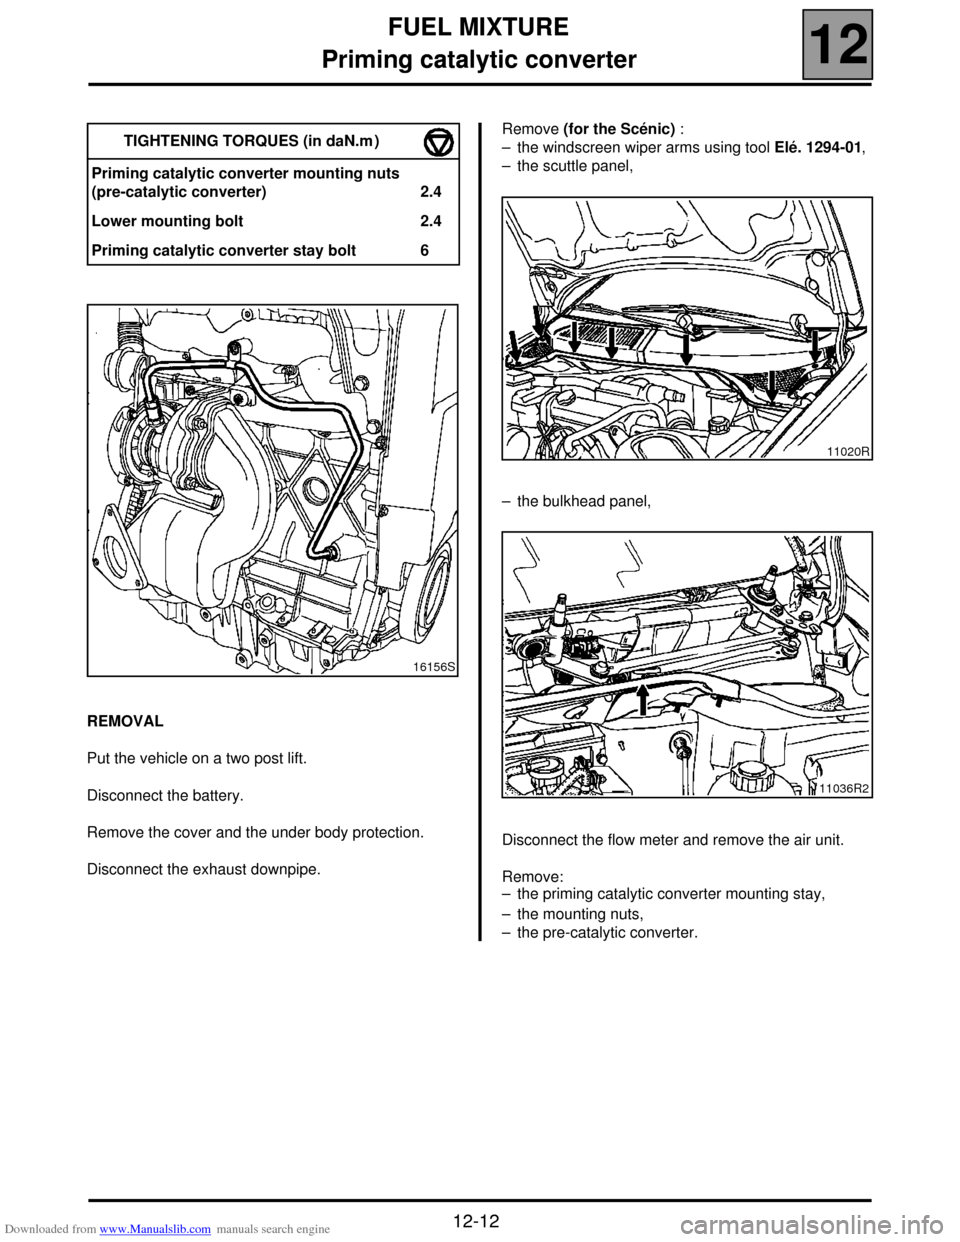 RENAULT SCENIC 2000 J64 / 1.G Technical Note 3426A Workshop Manual Downloaded from www.Manualslib.com manuals search engine FUEL MIXTURE
Priming catalytic converter
12
12-12
Priming catalytic converter
REMOVAL
Put the vehicle on a two post lift.
Disconnect the batter